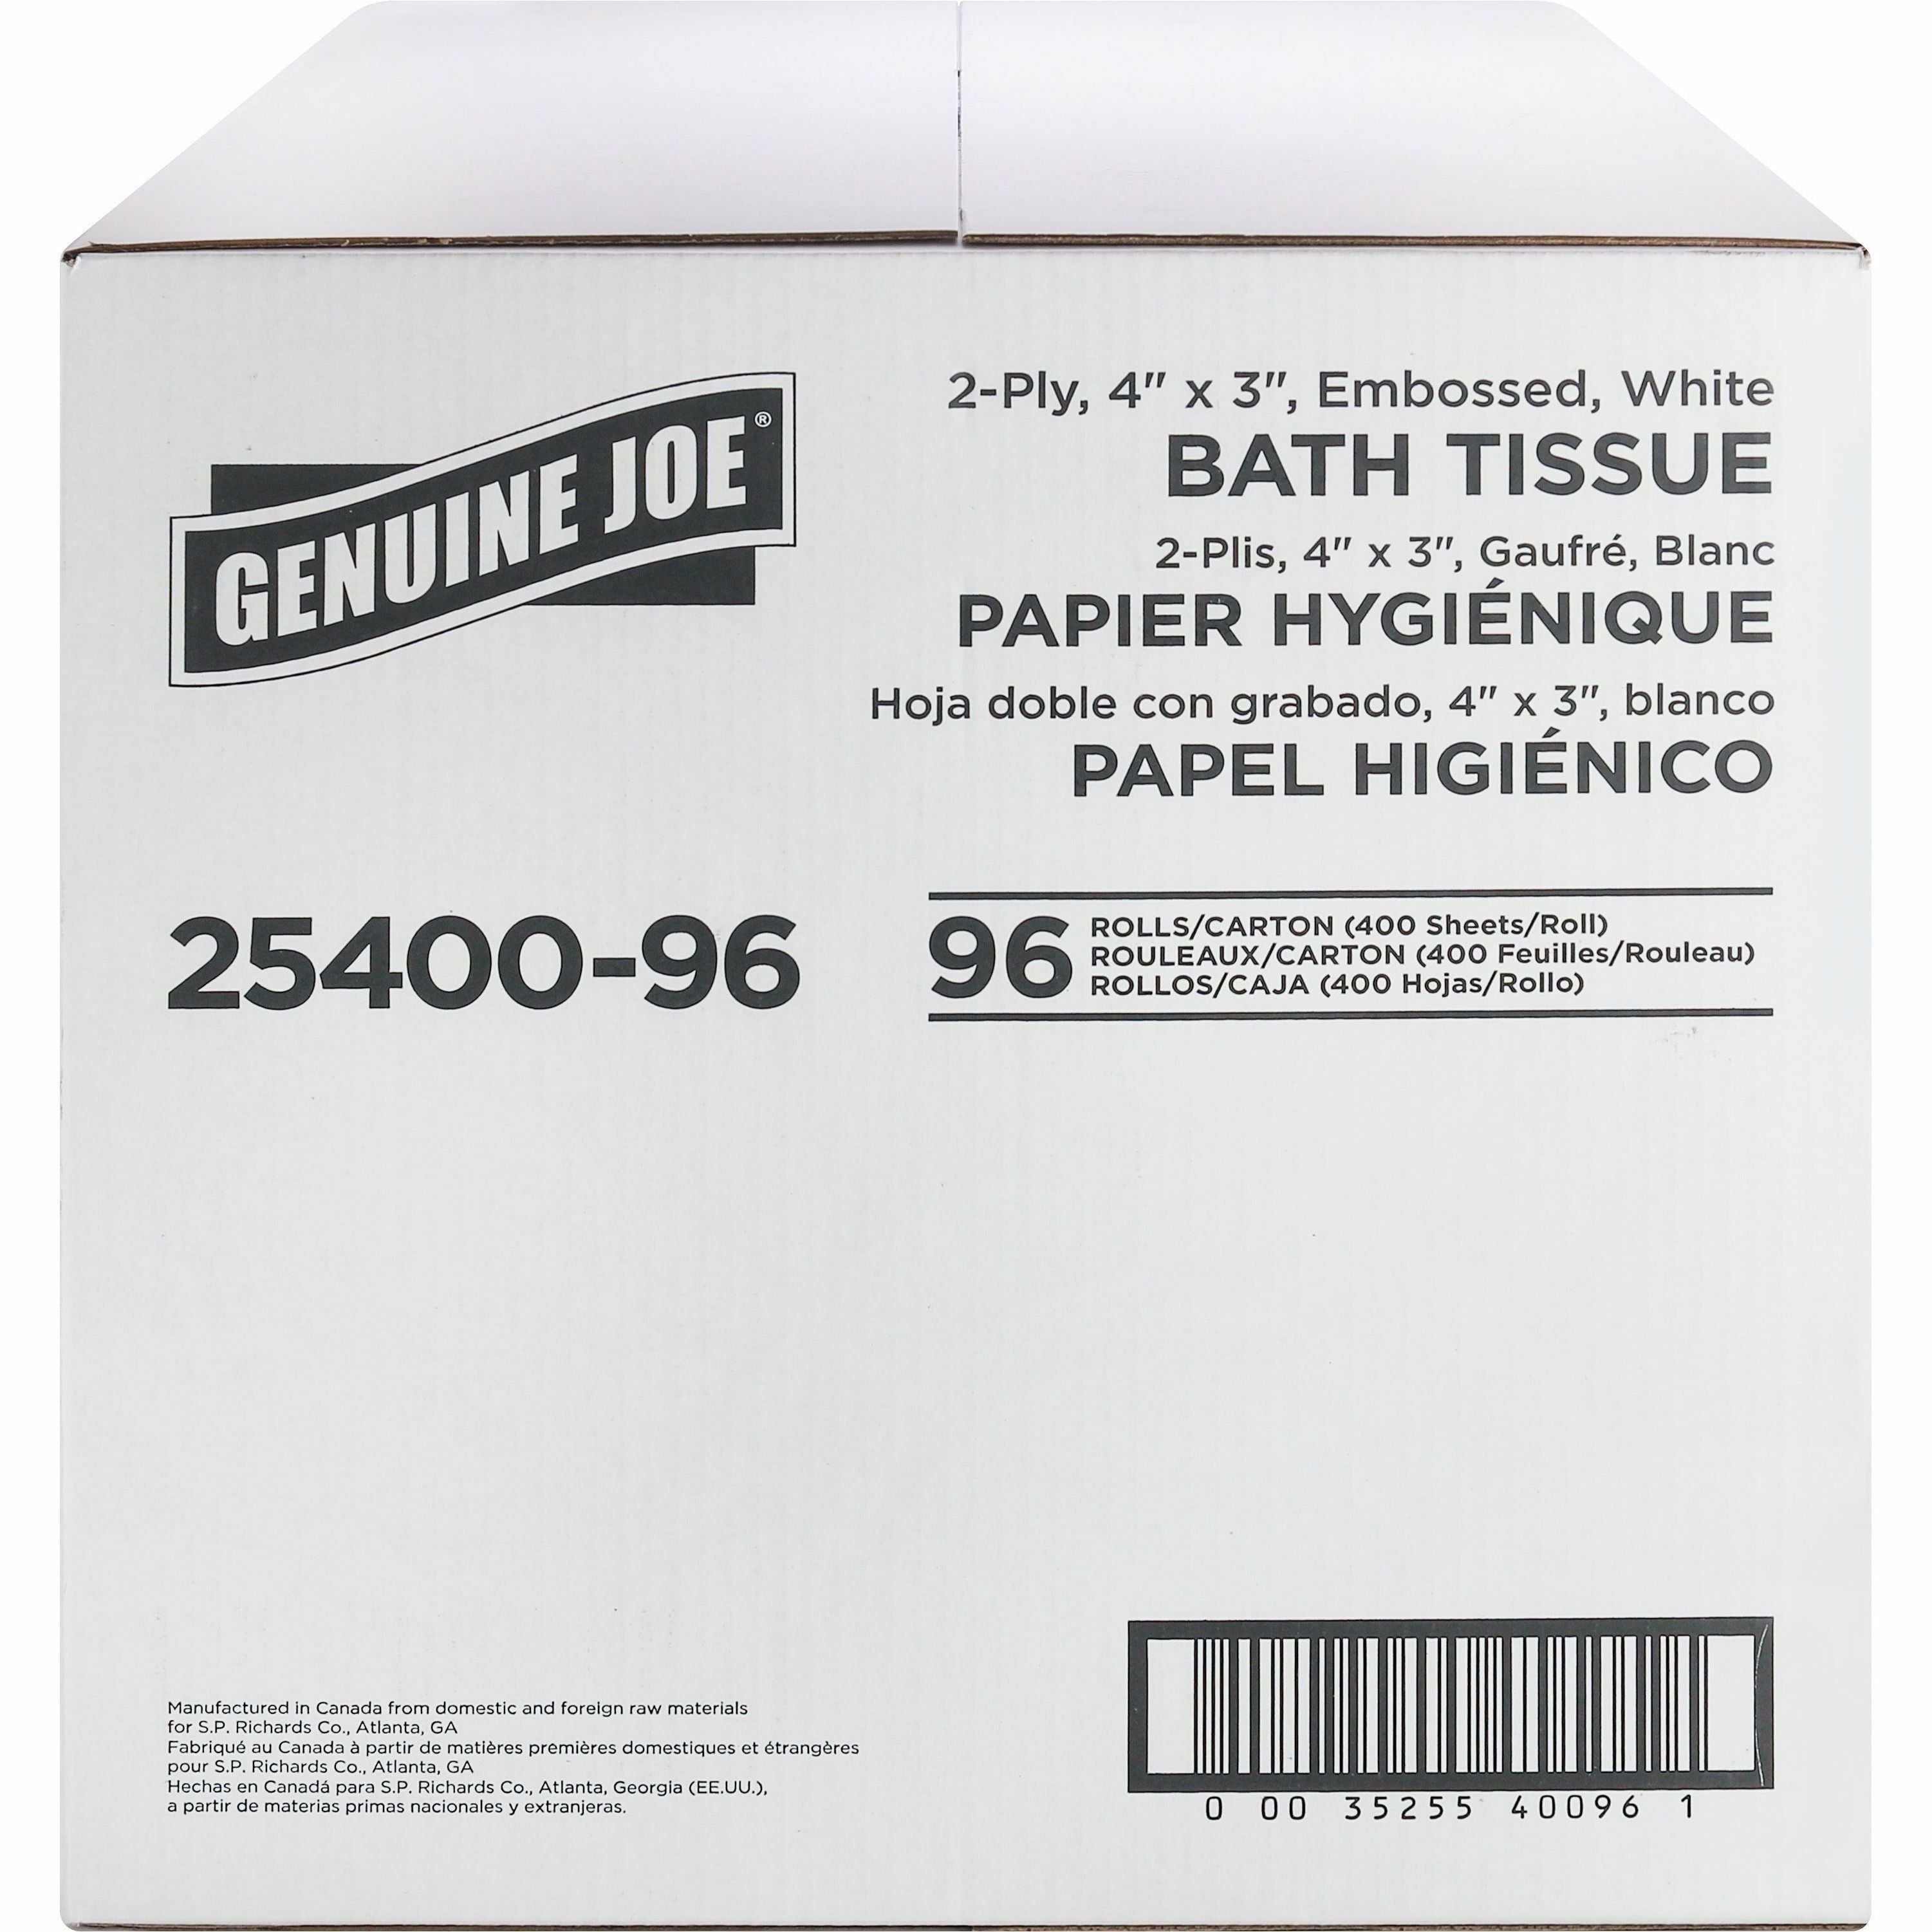 genuine-joe-2-ply-standard-bath-tissue-rolls-2-ply-3-x-4-400-sheets-roll-163-core-white-perforated-absorbent-soft-embossed-for-restroom-96-carton_gjo2540096 - 2